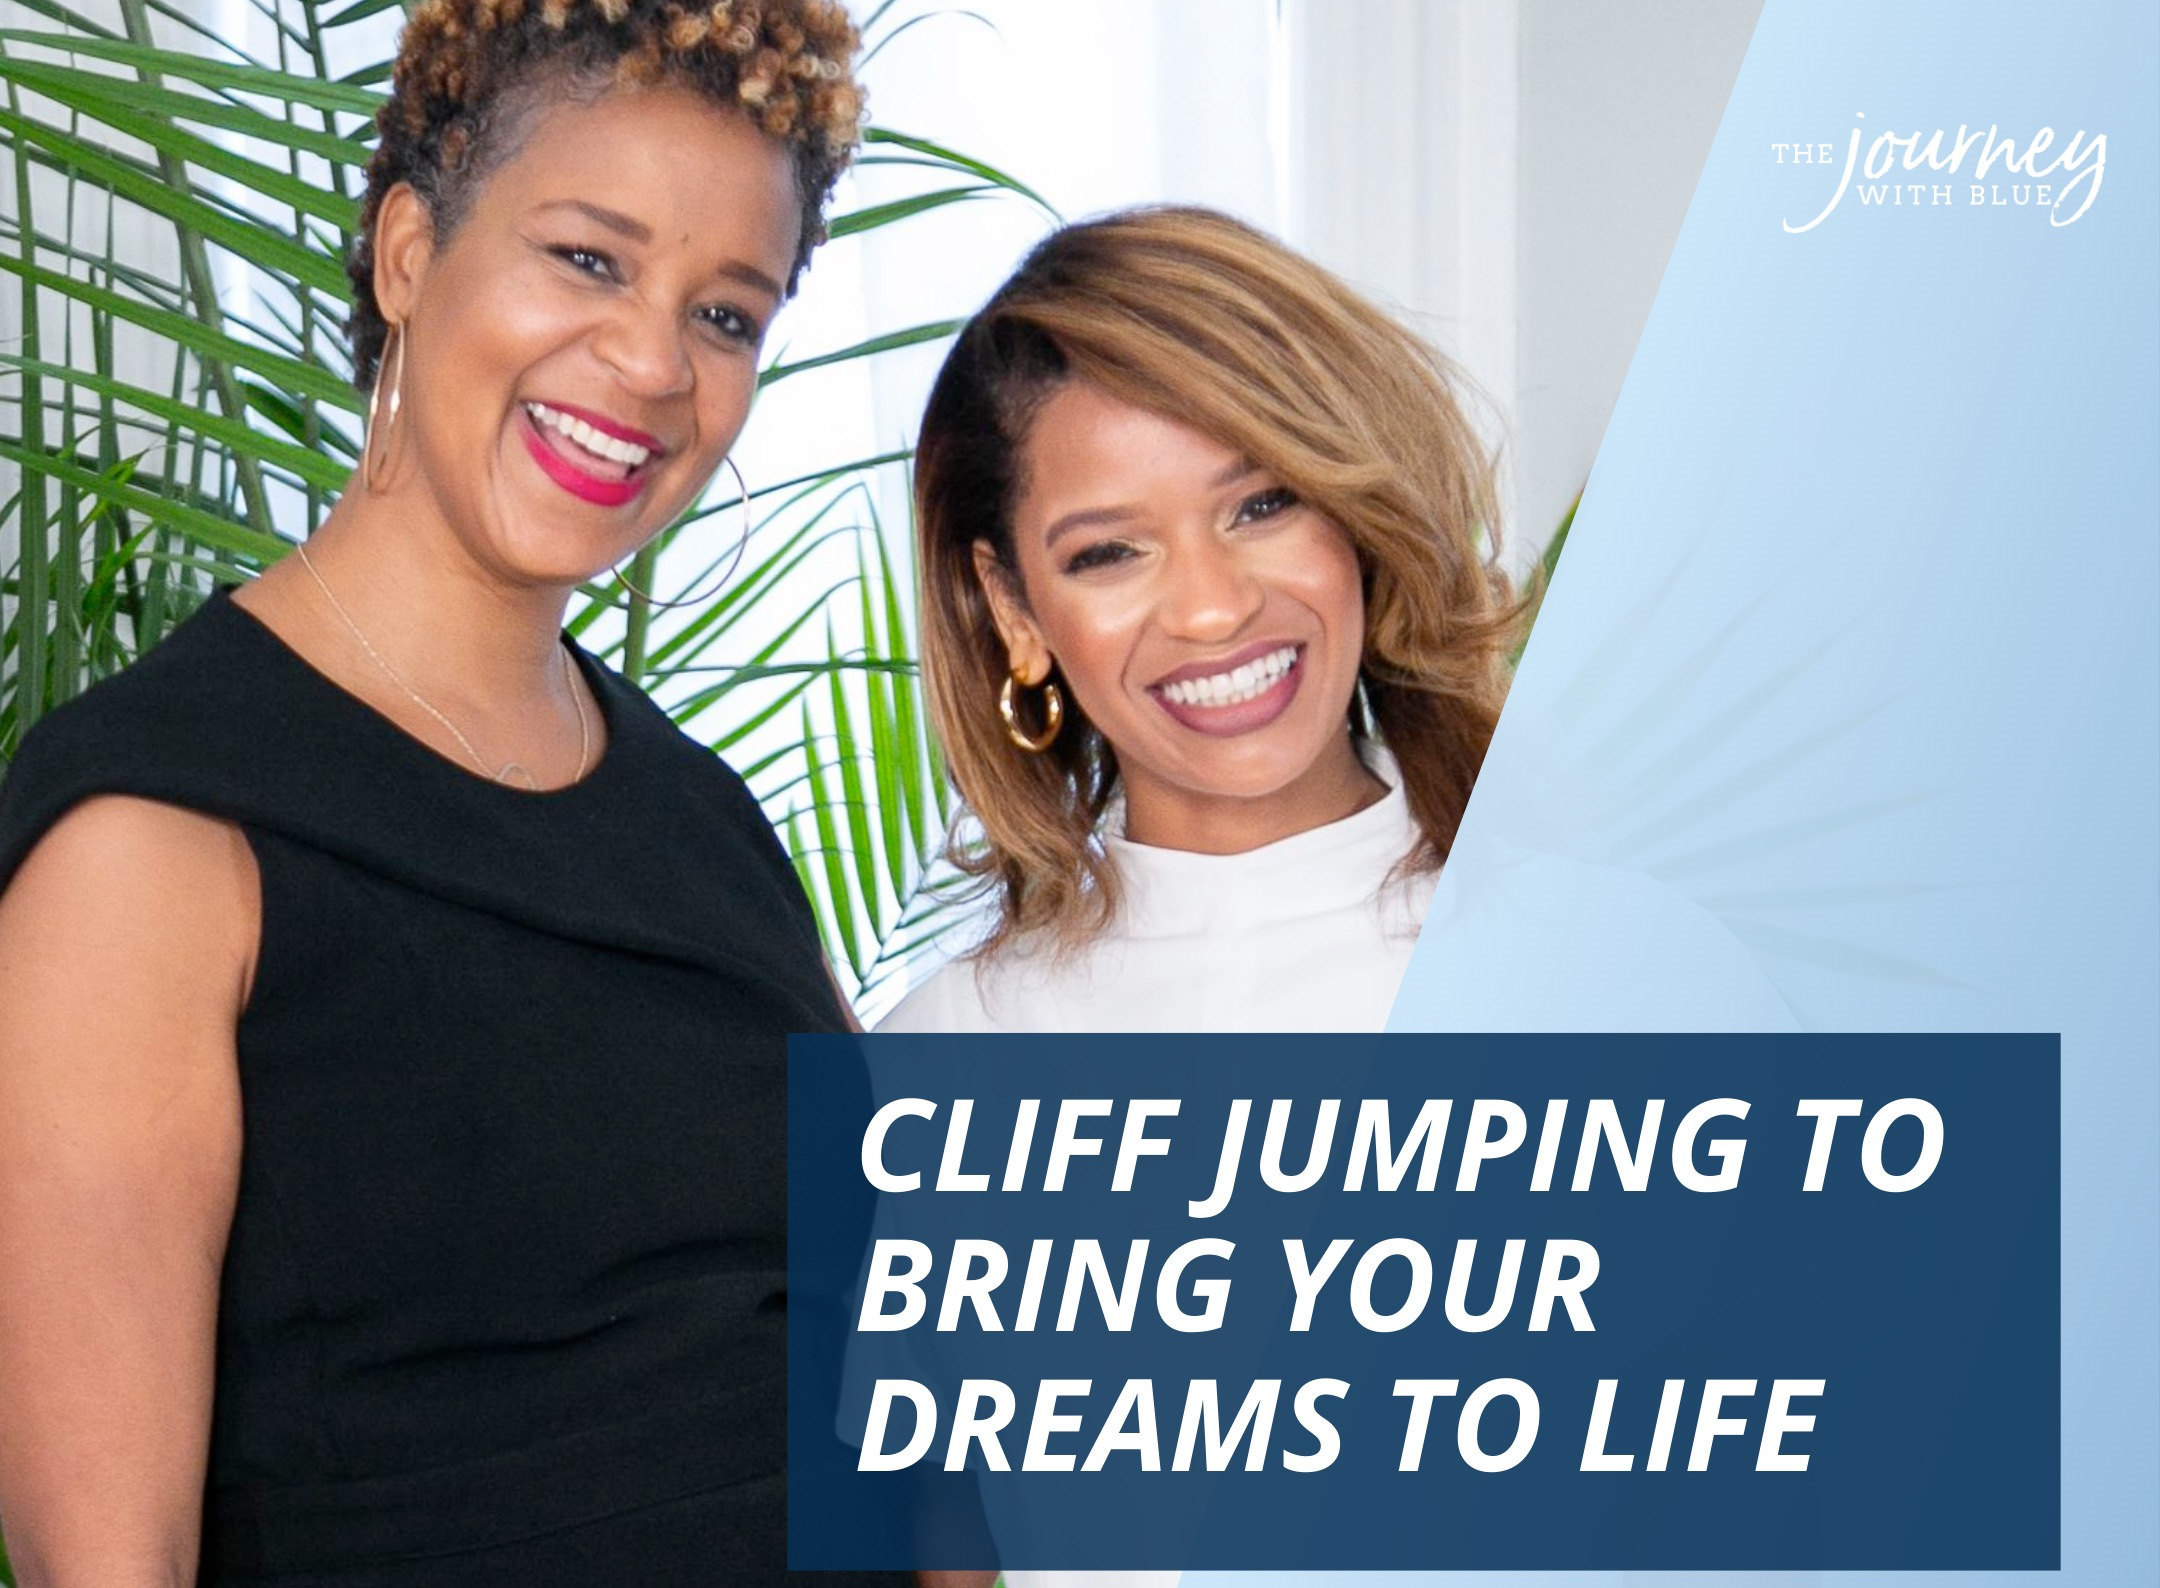 Cliff Jumping to Bring Your Dreams to Life with Brandice Daniel | The Journey With Blue Season 3, Episode 2